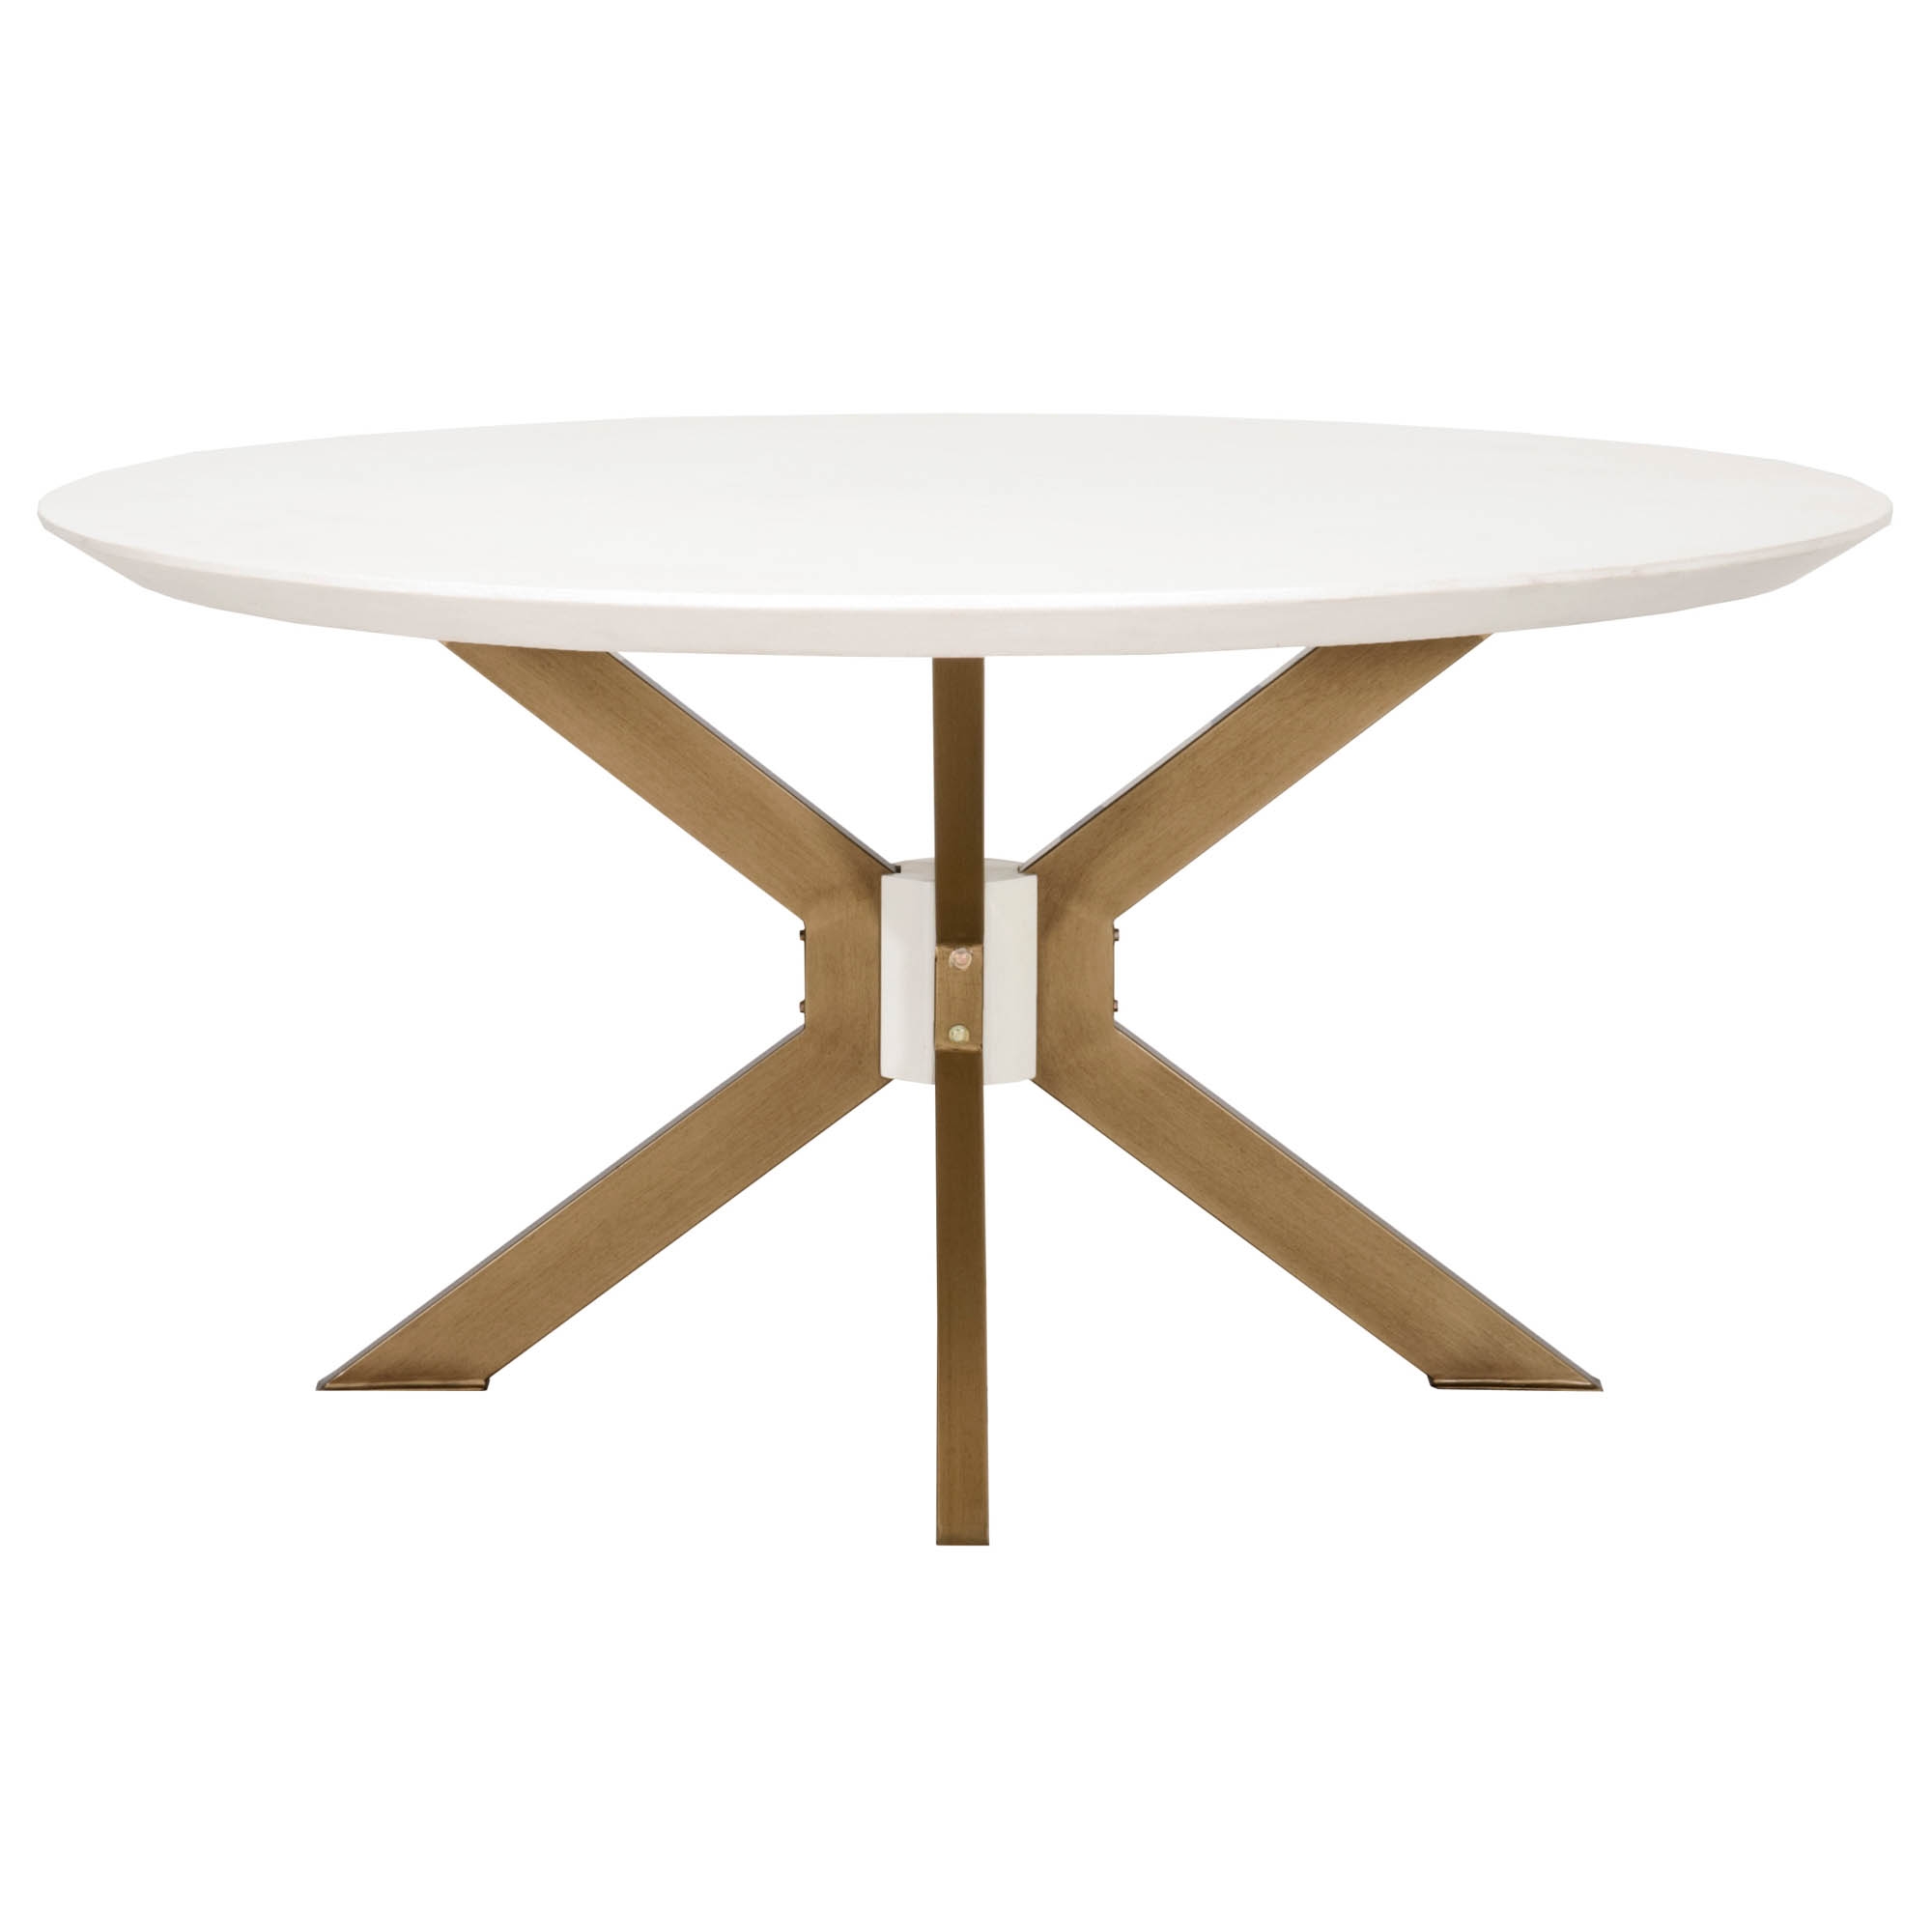 Industry 60" Round Dining Table - Image 2